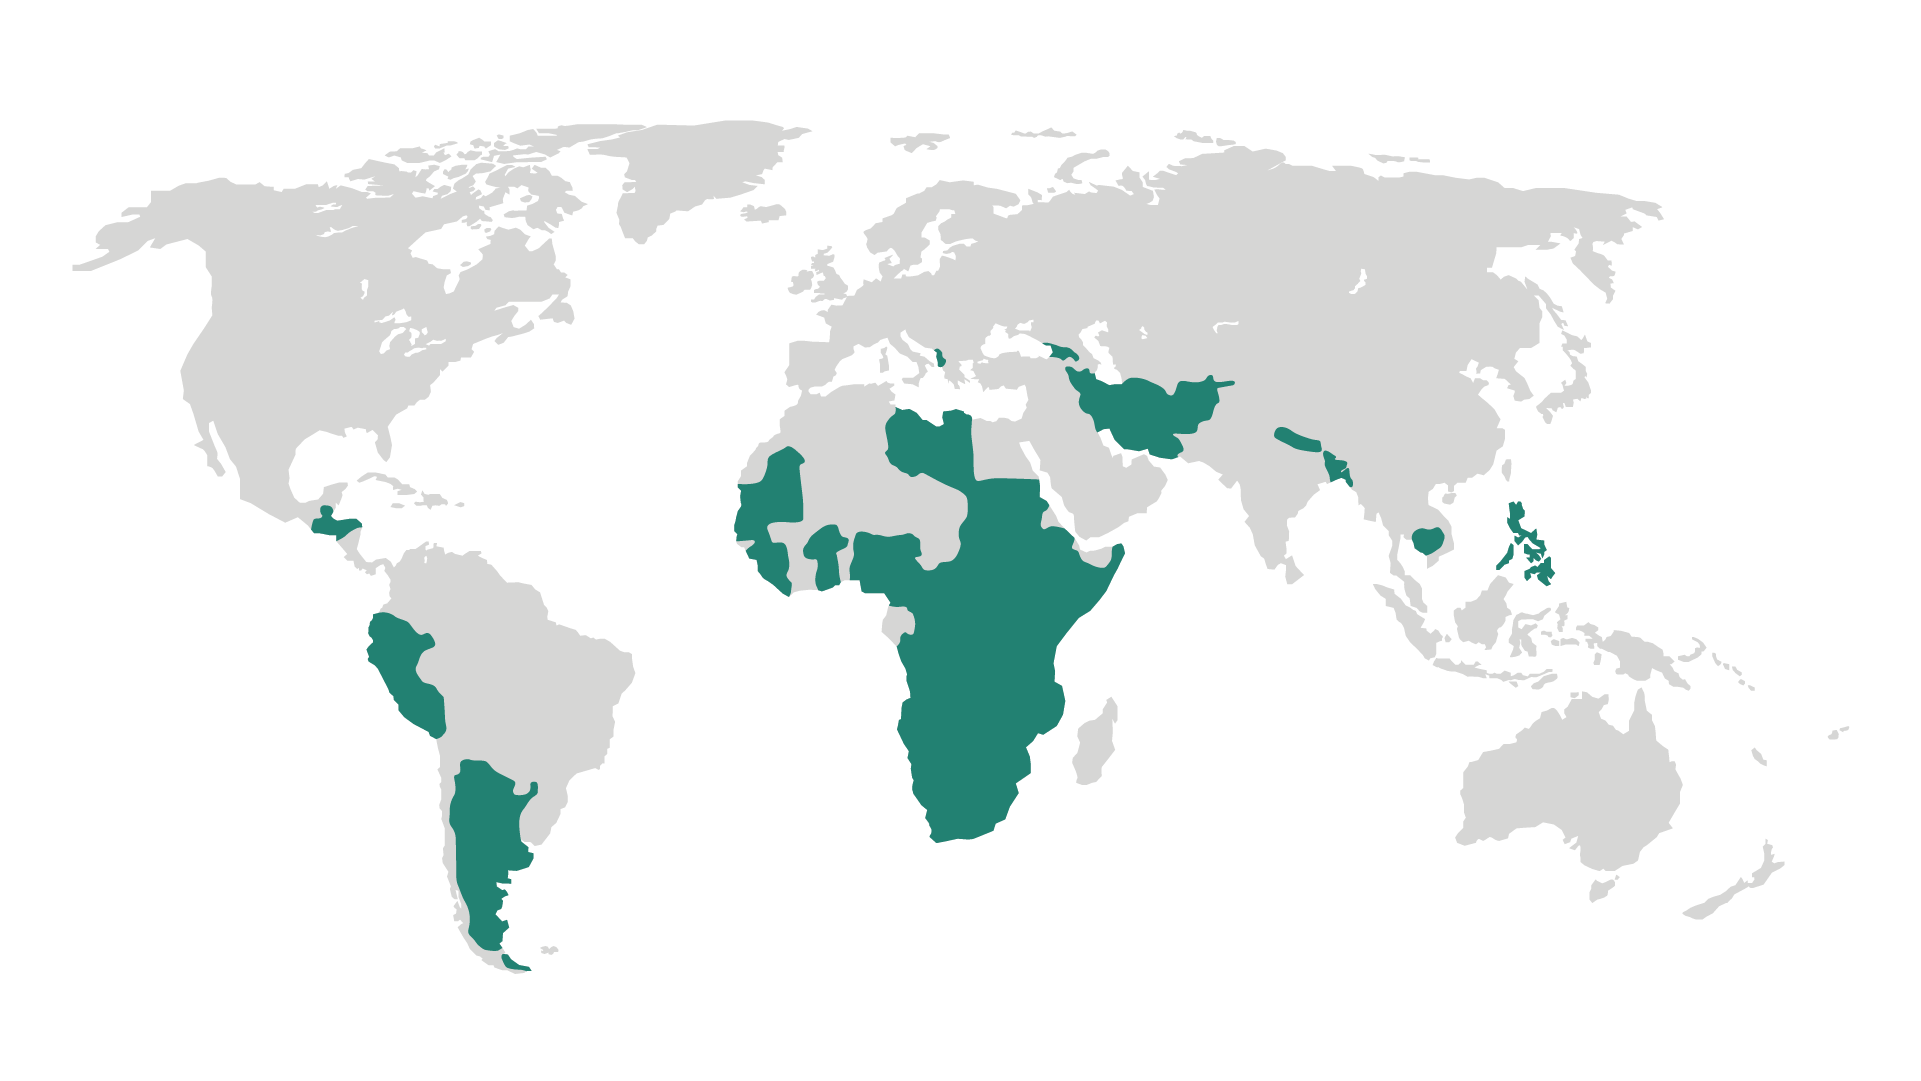 The map shows regions of the world where more than 30 percent of the present-day population is exposed to moderate or severe food insecurity. The regions are: Central America, western South America, southern South America, western, central, and southern Africa, southern Asia, parts of the southeast Asia and the Philippines.